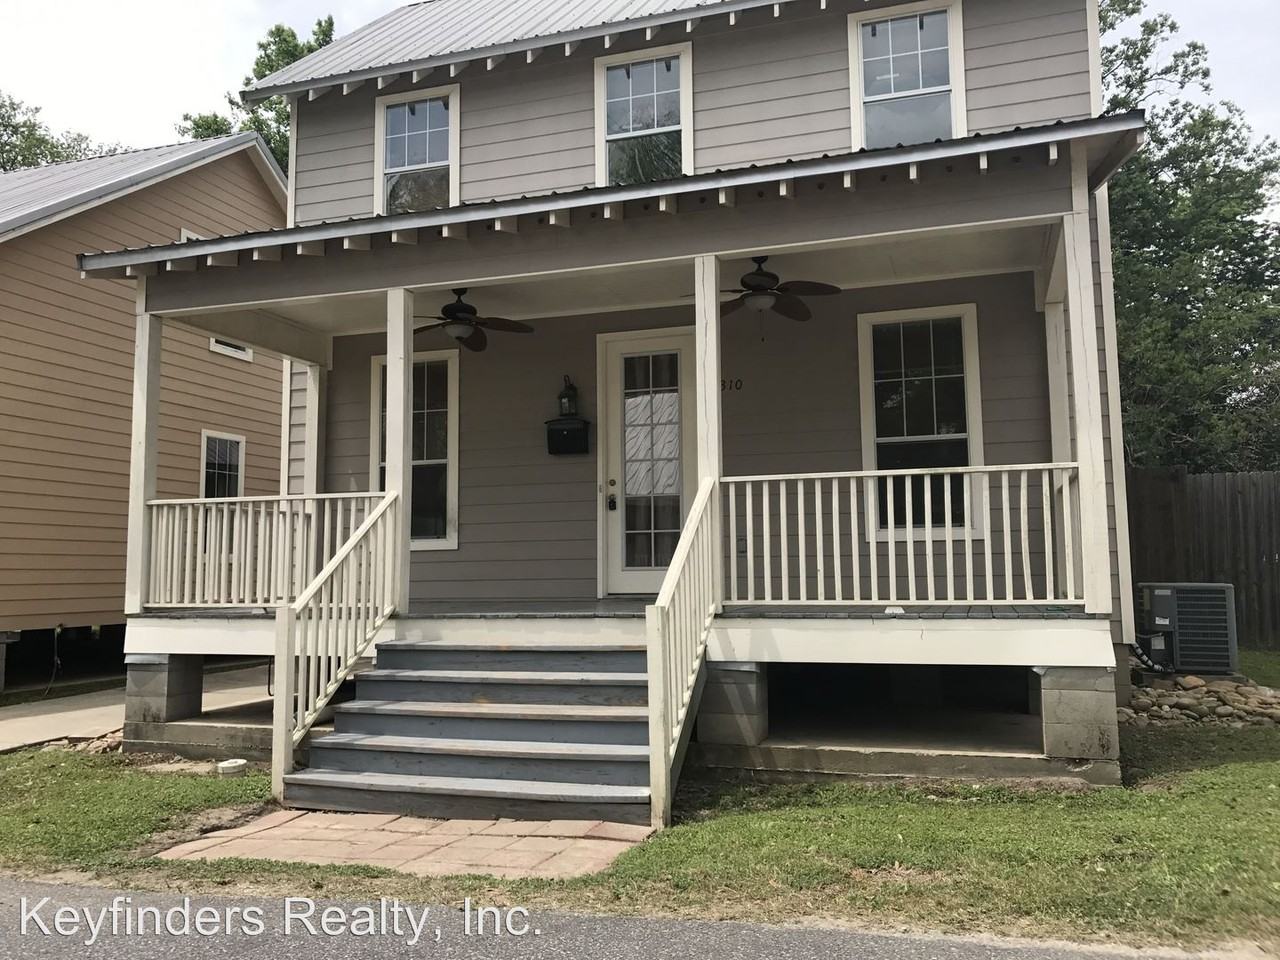 1310 S. 18th Street, Baton Rouge, LA 70802 3 Bedroom House for Rent for $1,300/month - Zumper